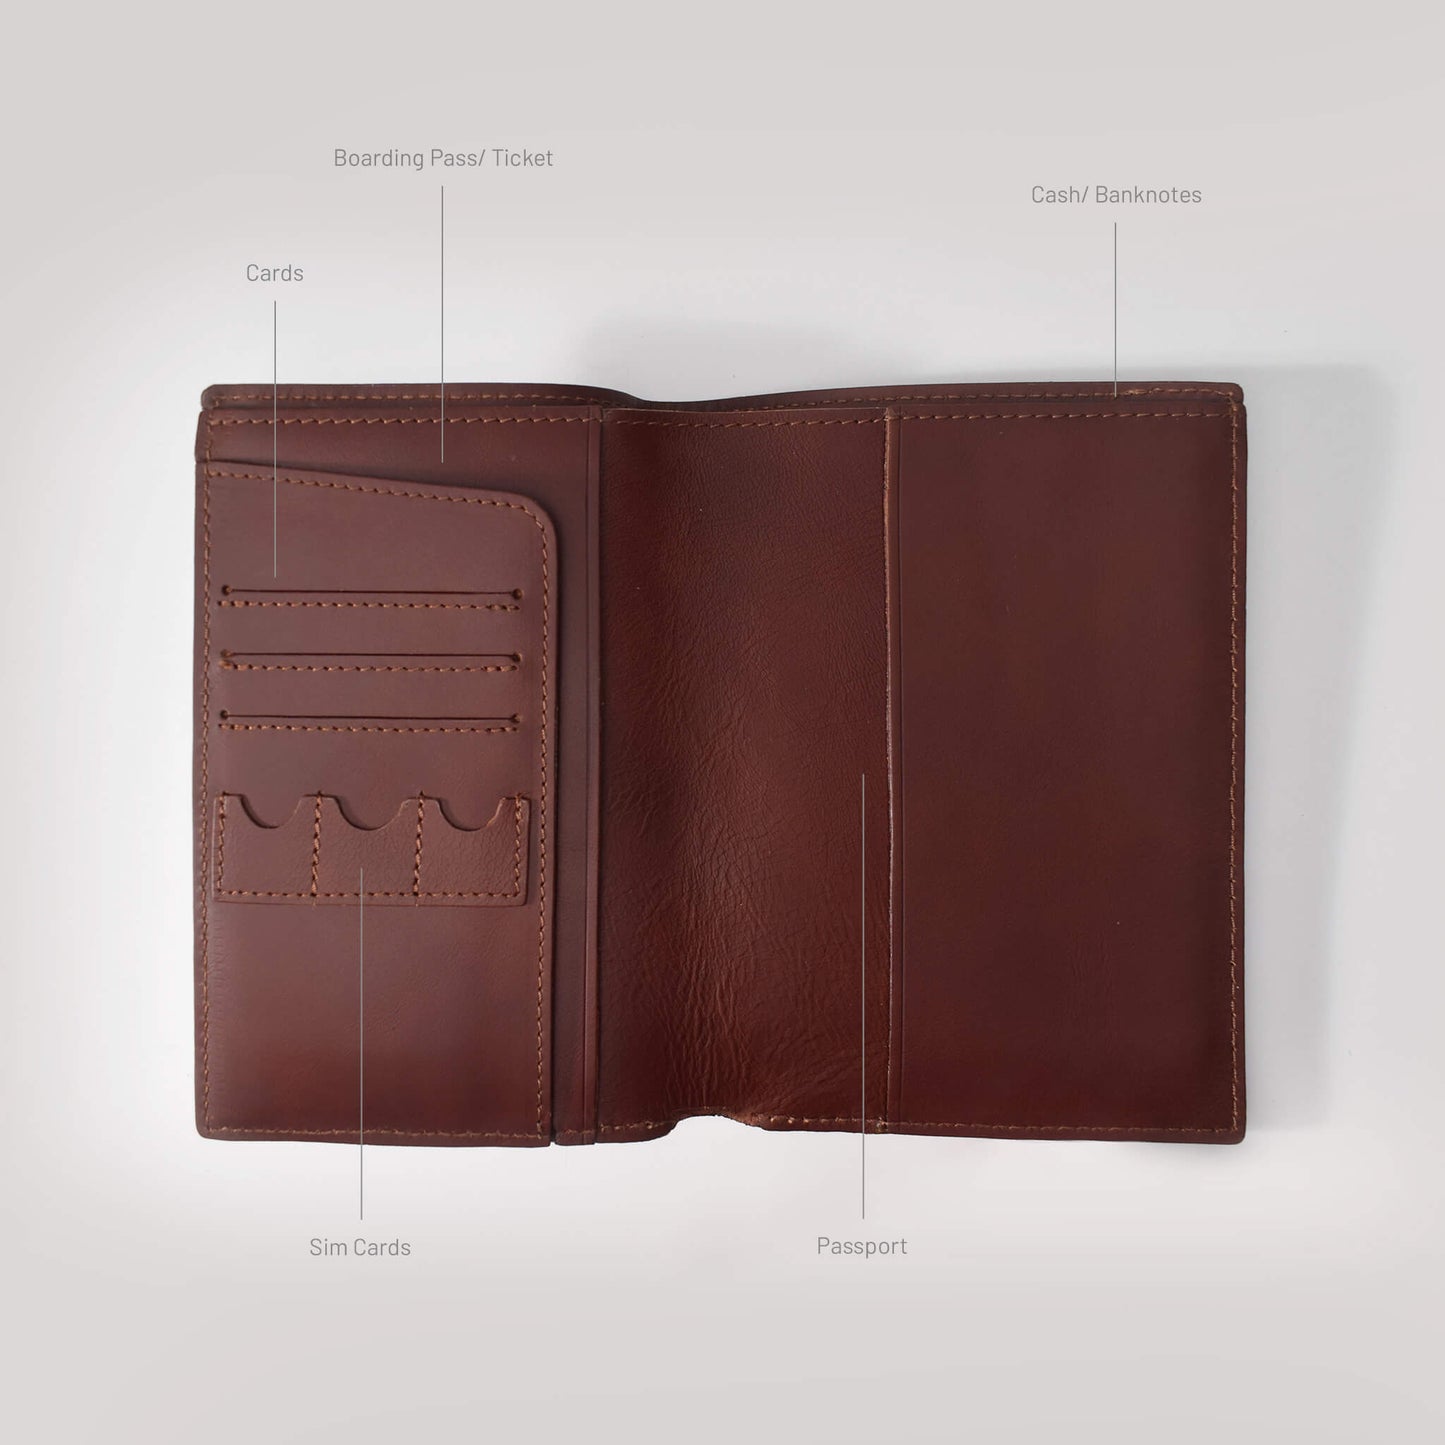 Zosma Leather 5-in-1 Wallet Passport Holder with Sim Card Slots